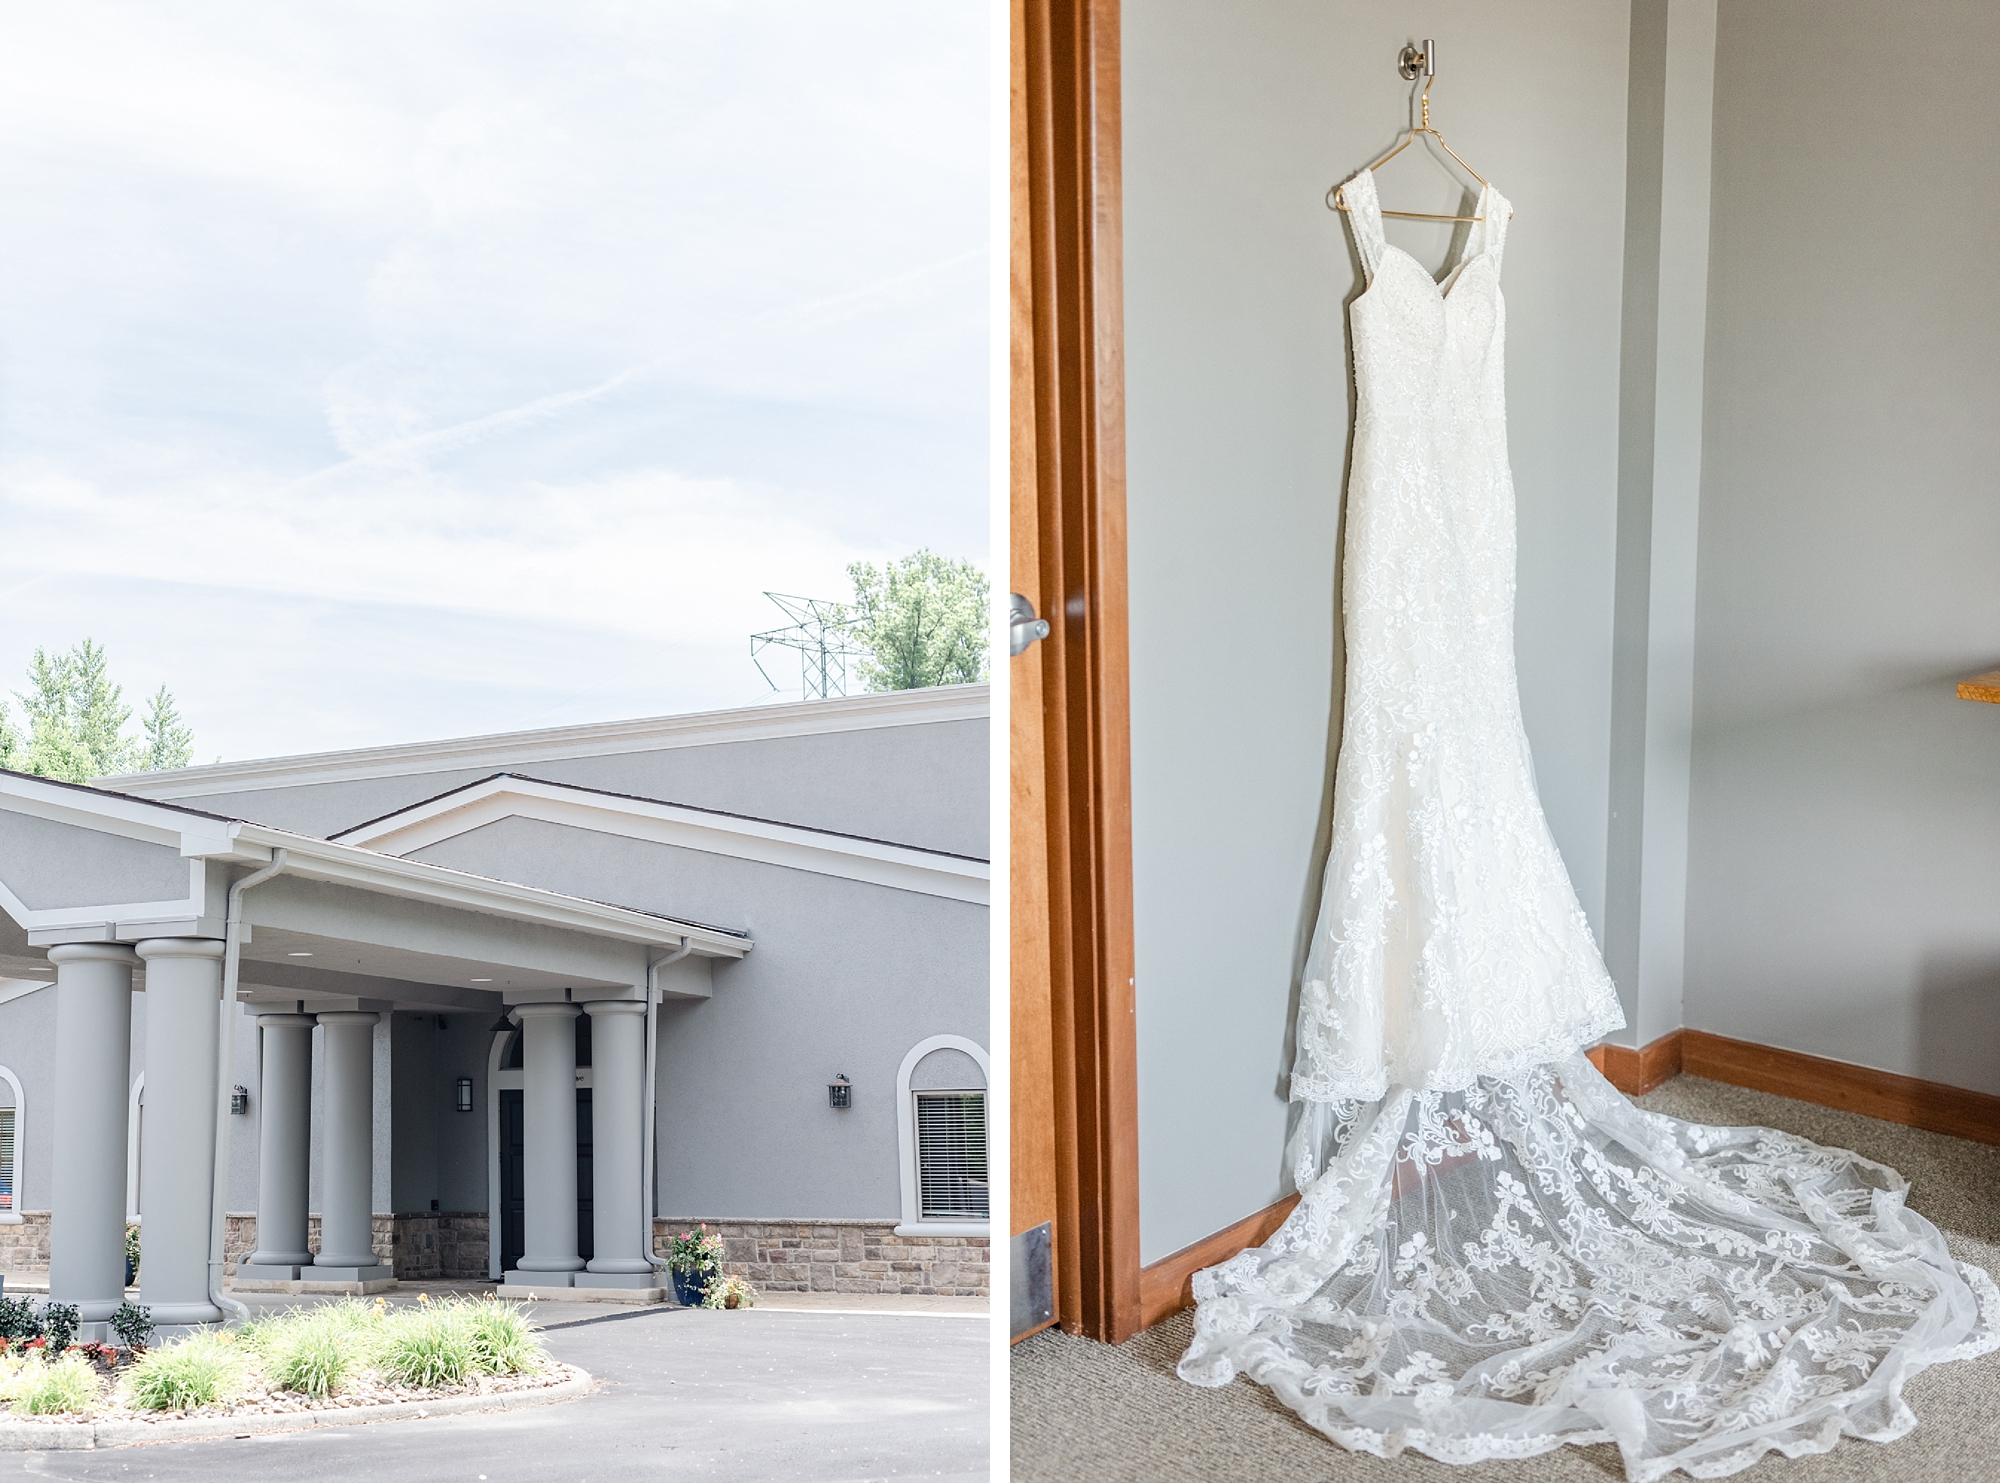 Brookshire wedding day and wedding dress photographed by Stephanie Kase Photography